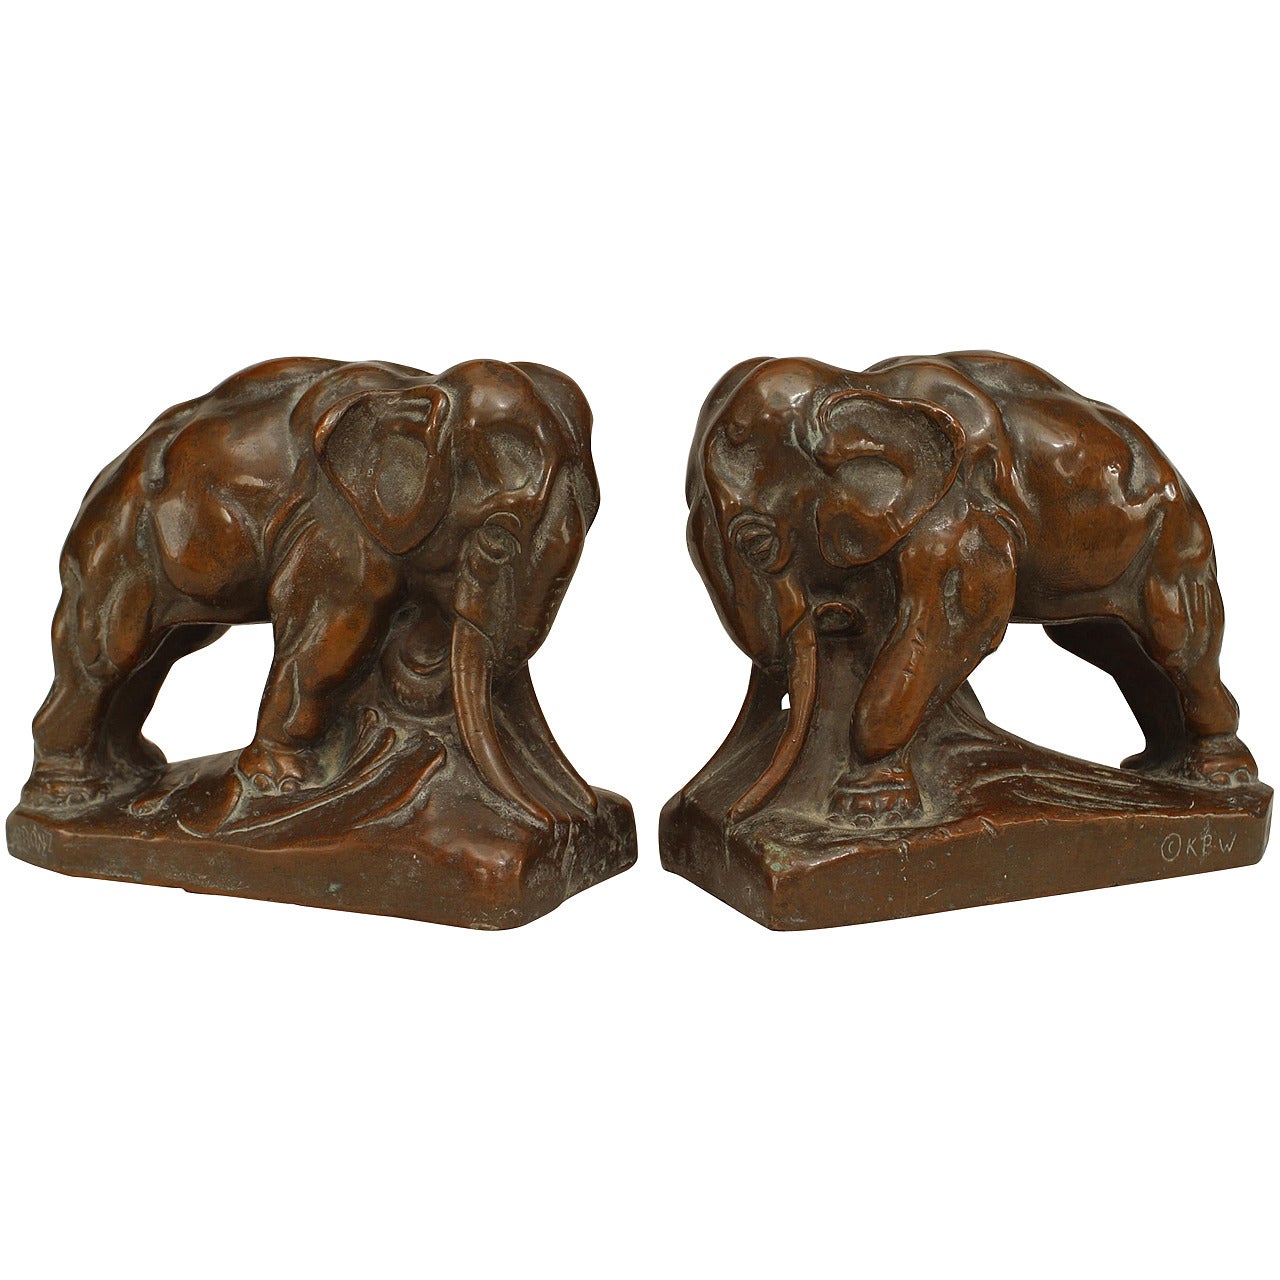 Pair of Continental Patinated Copper Elephant Bookends